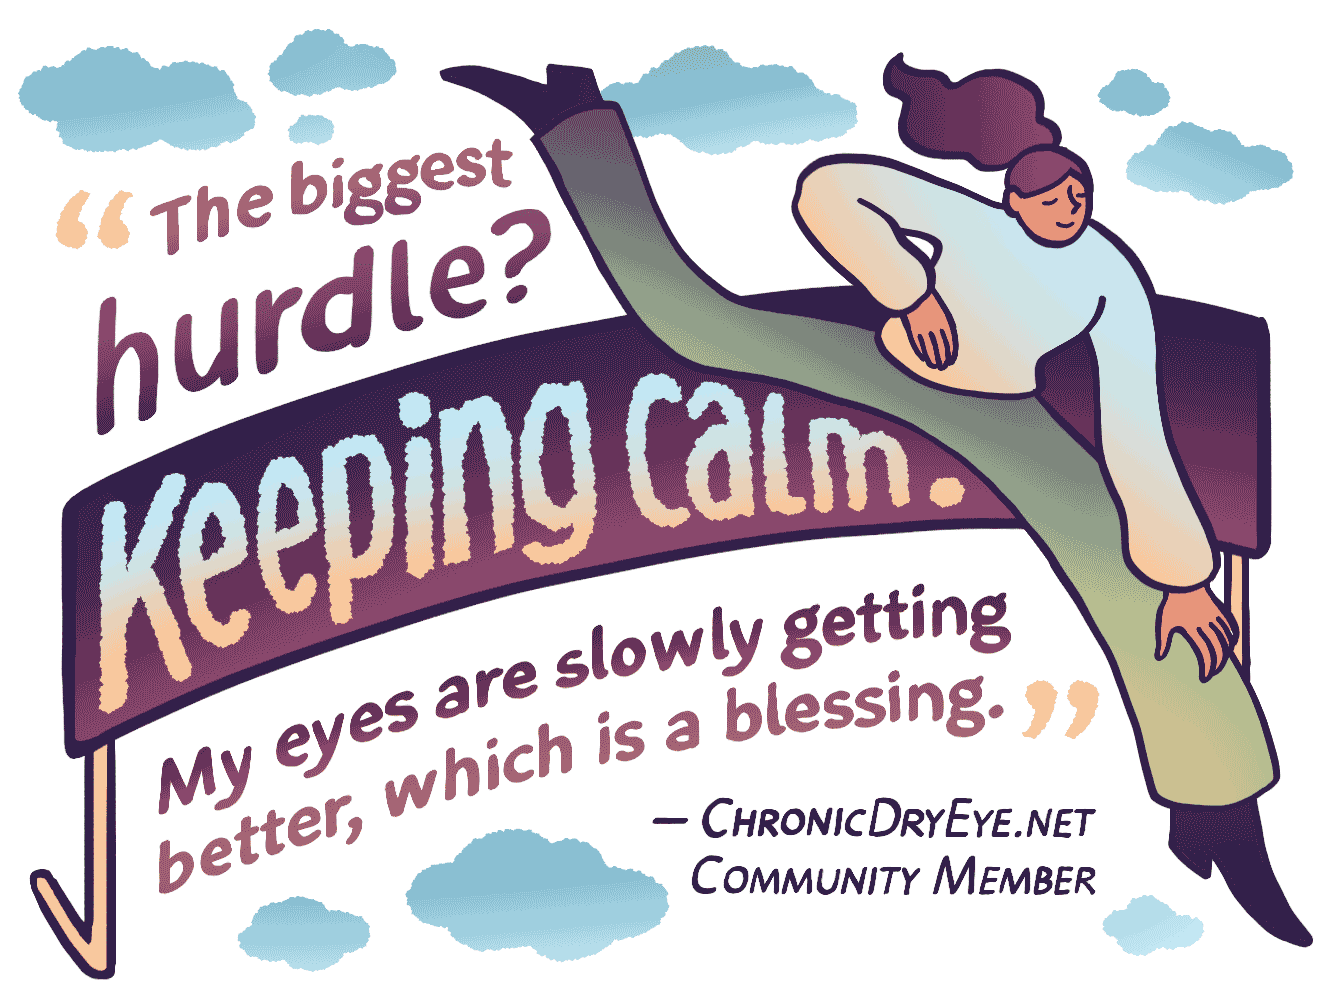 My biggest hurdle? Keeping calm. My eyes are slowly getting better, which is a blessing. - ChronicDryEye.net Community Member